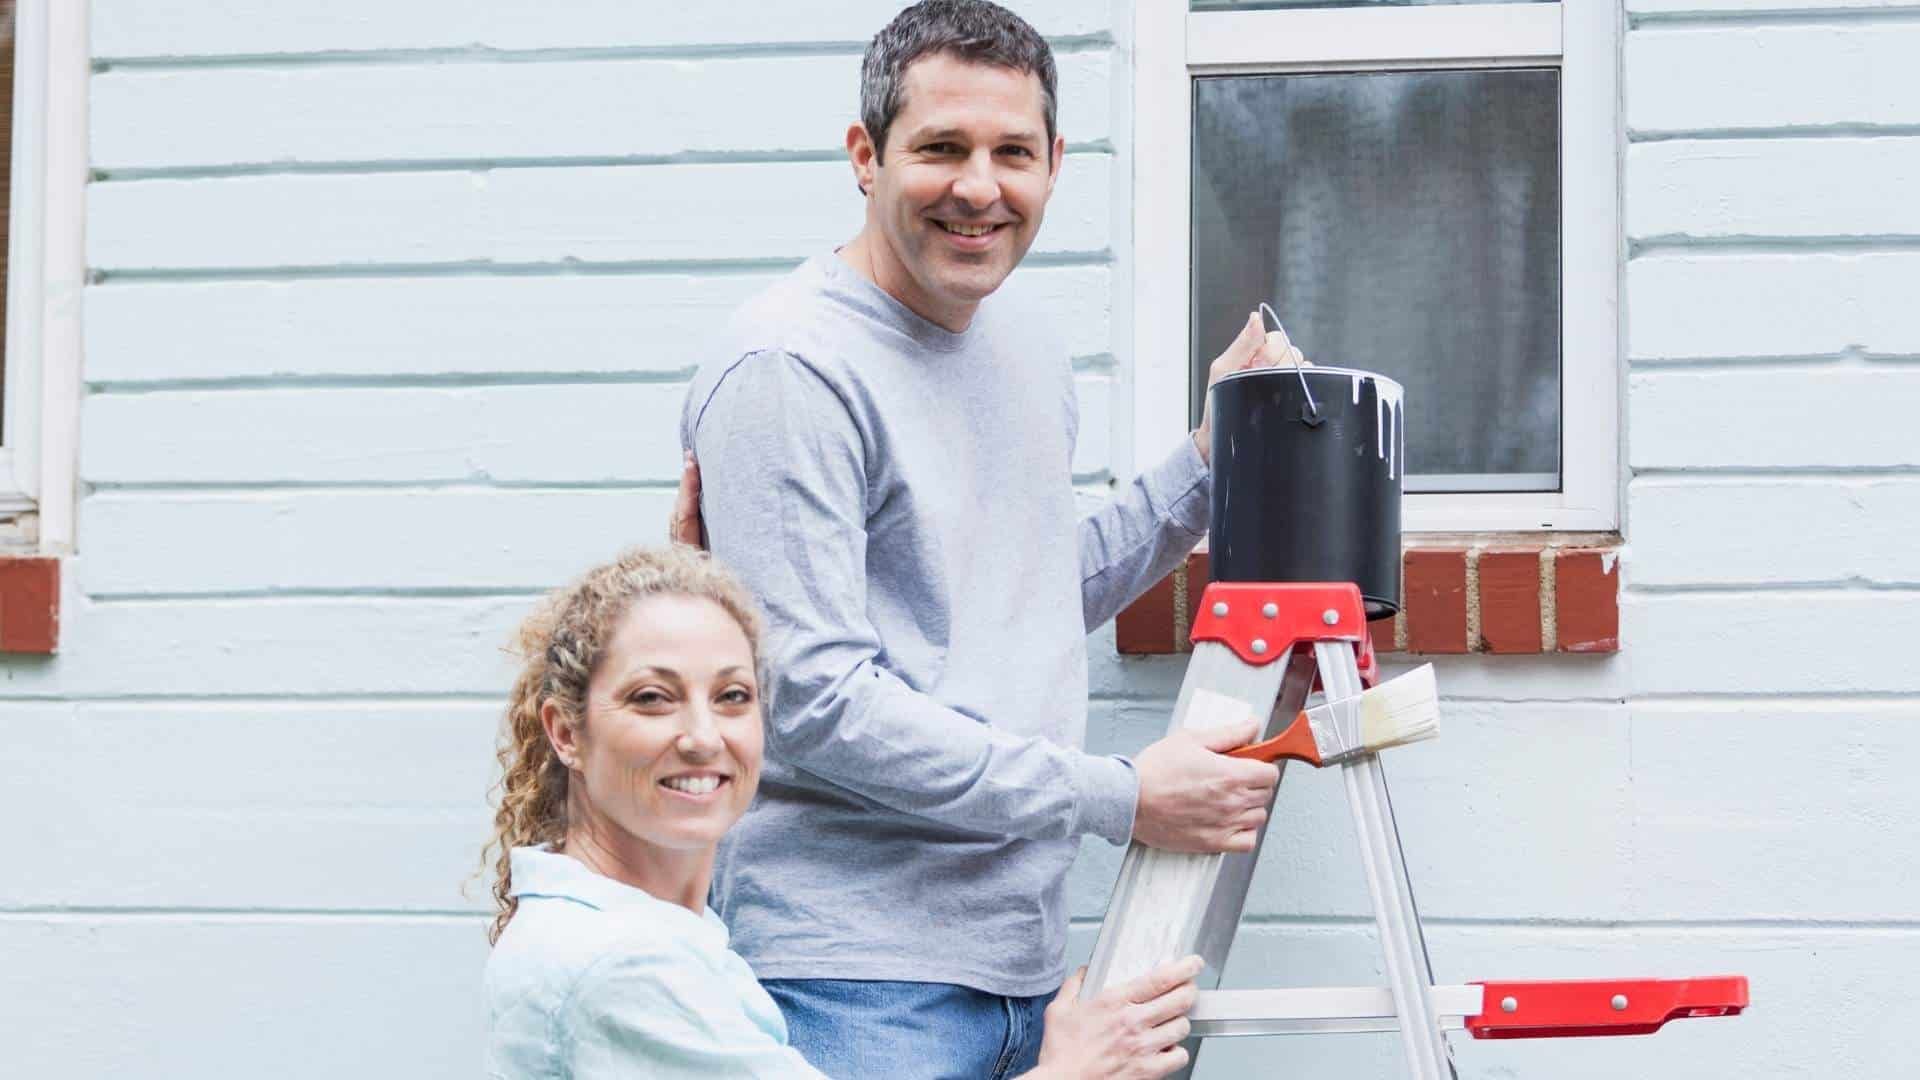 Painting the front of your house: is it worth it?